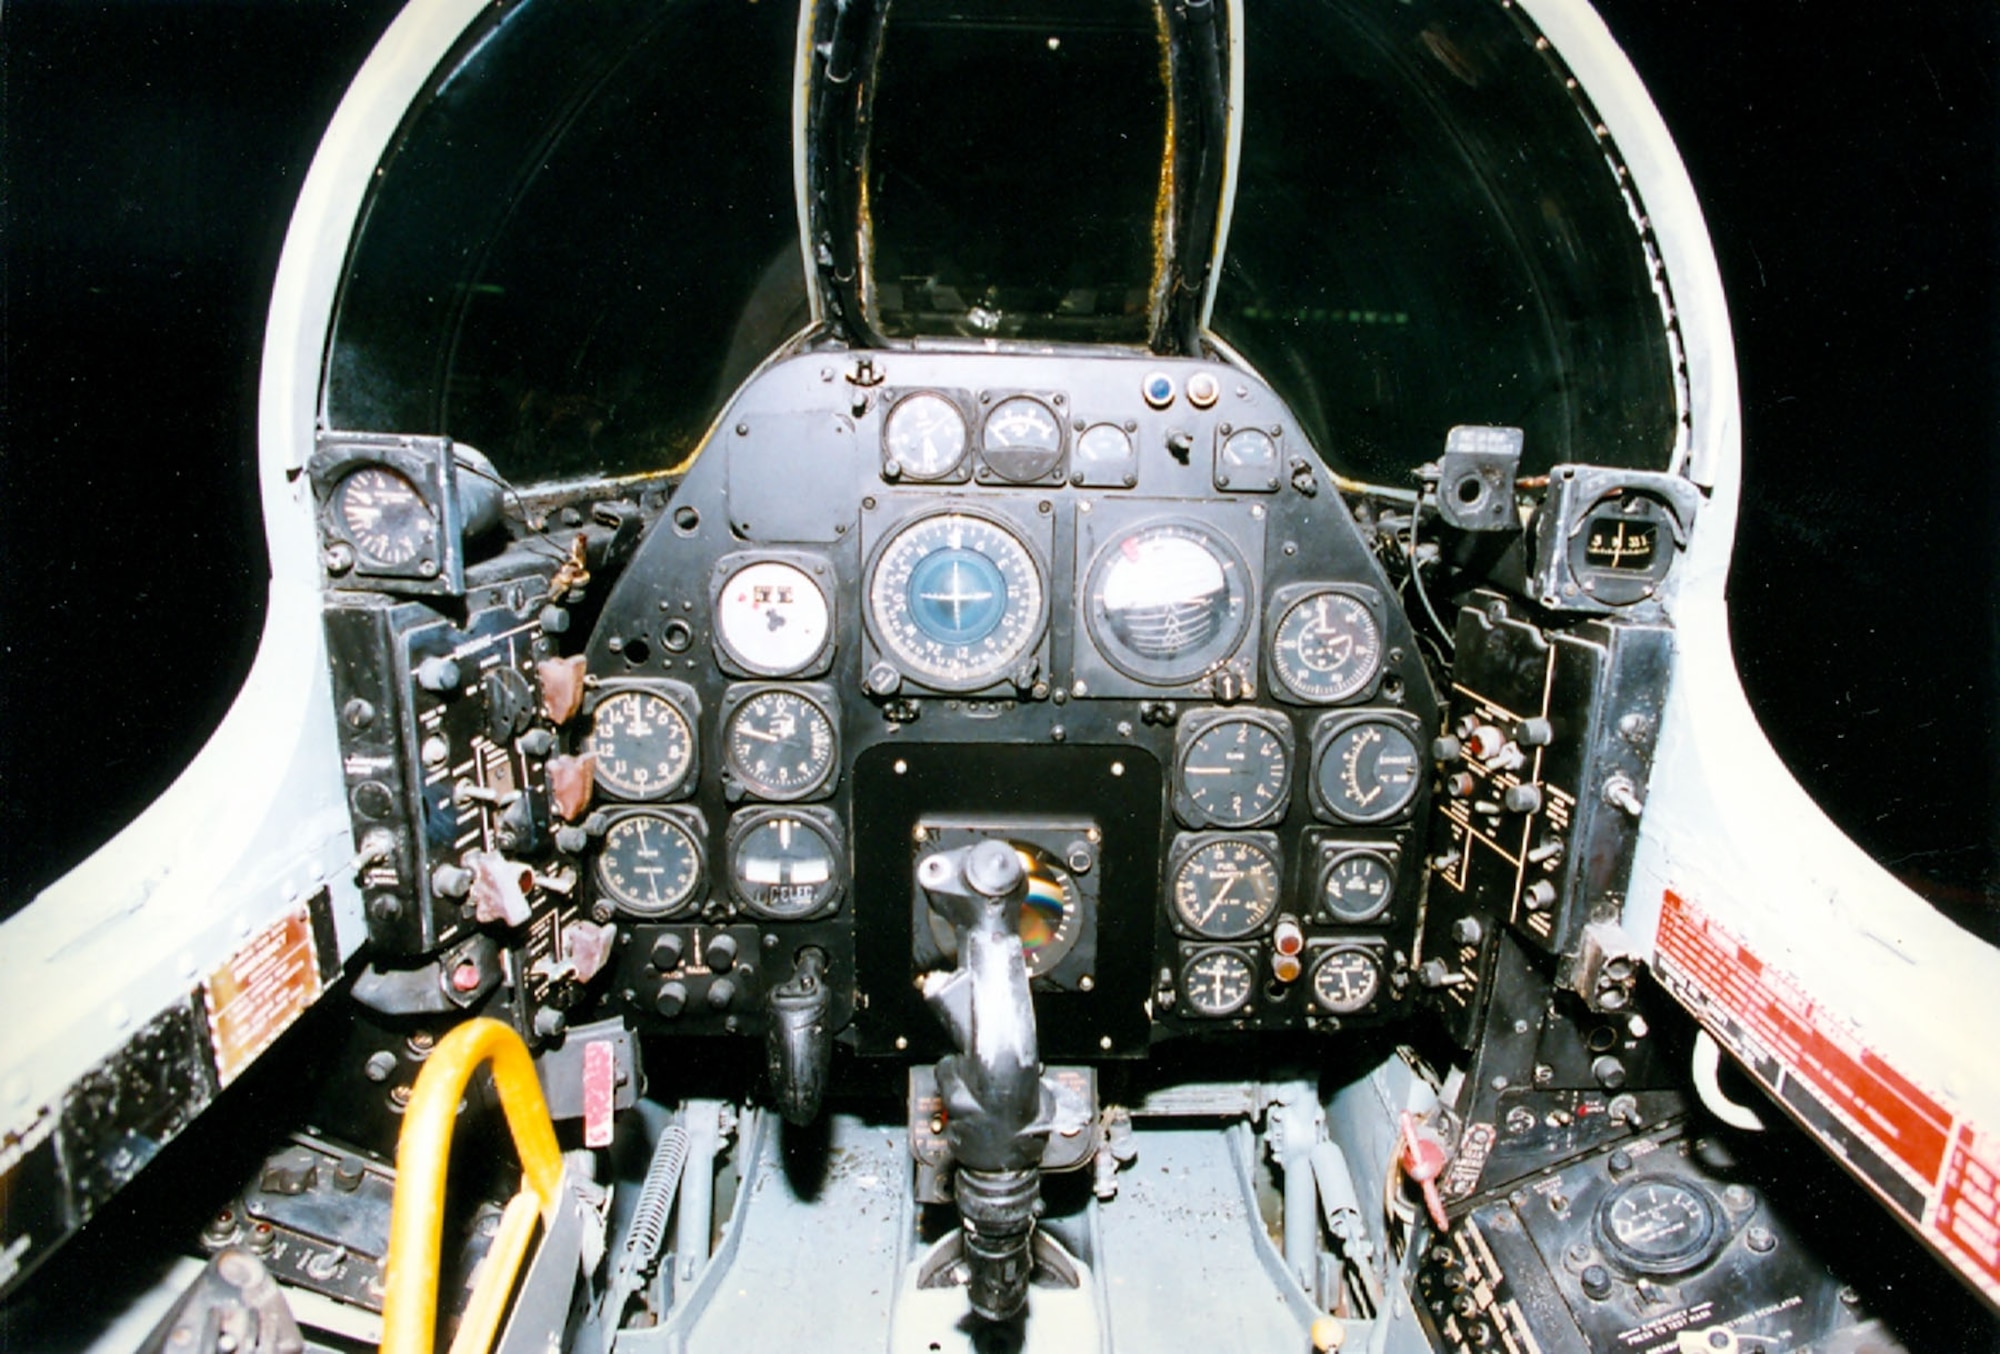 DAYTON, Ohio -- North American F-86D cockpit at the National Museum of the United States Air Force. (U.S. Air Force photo)